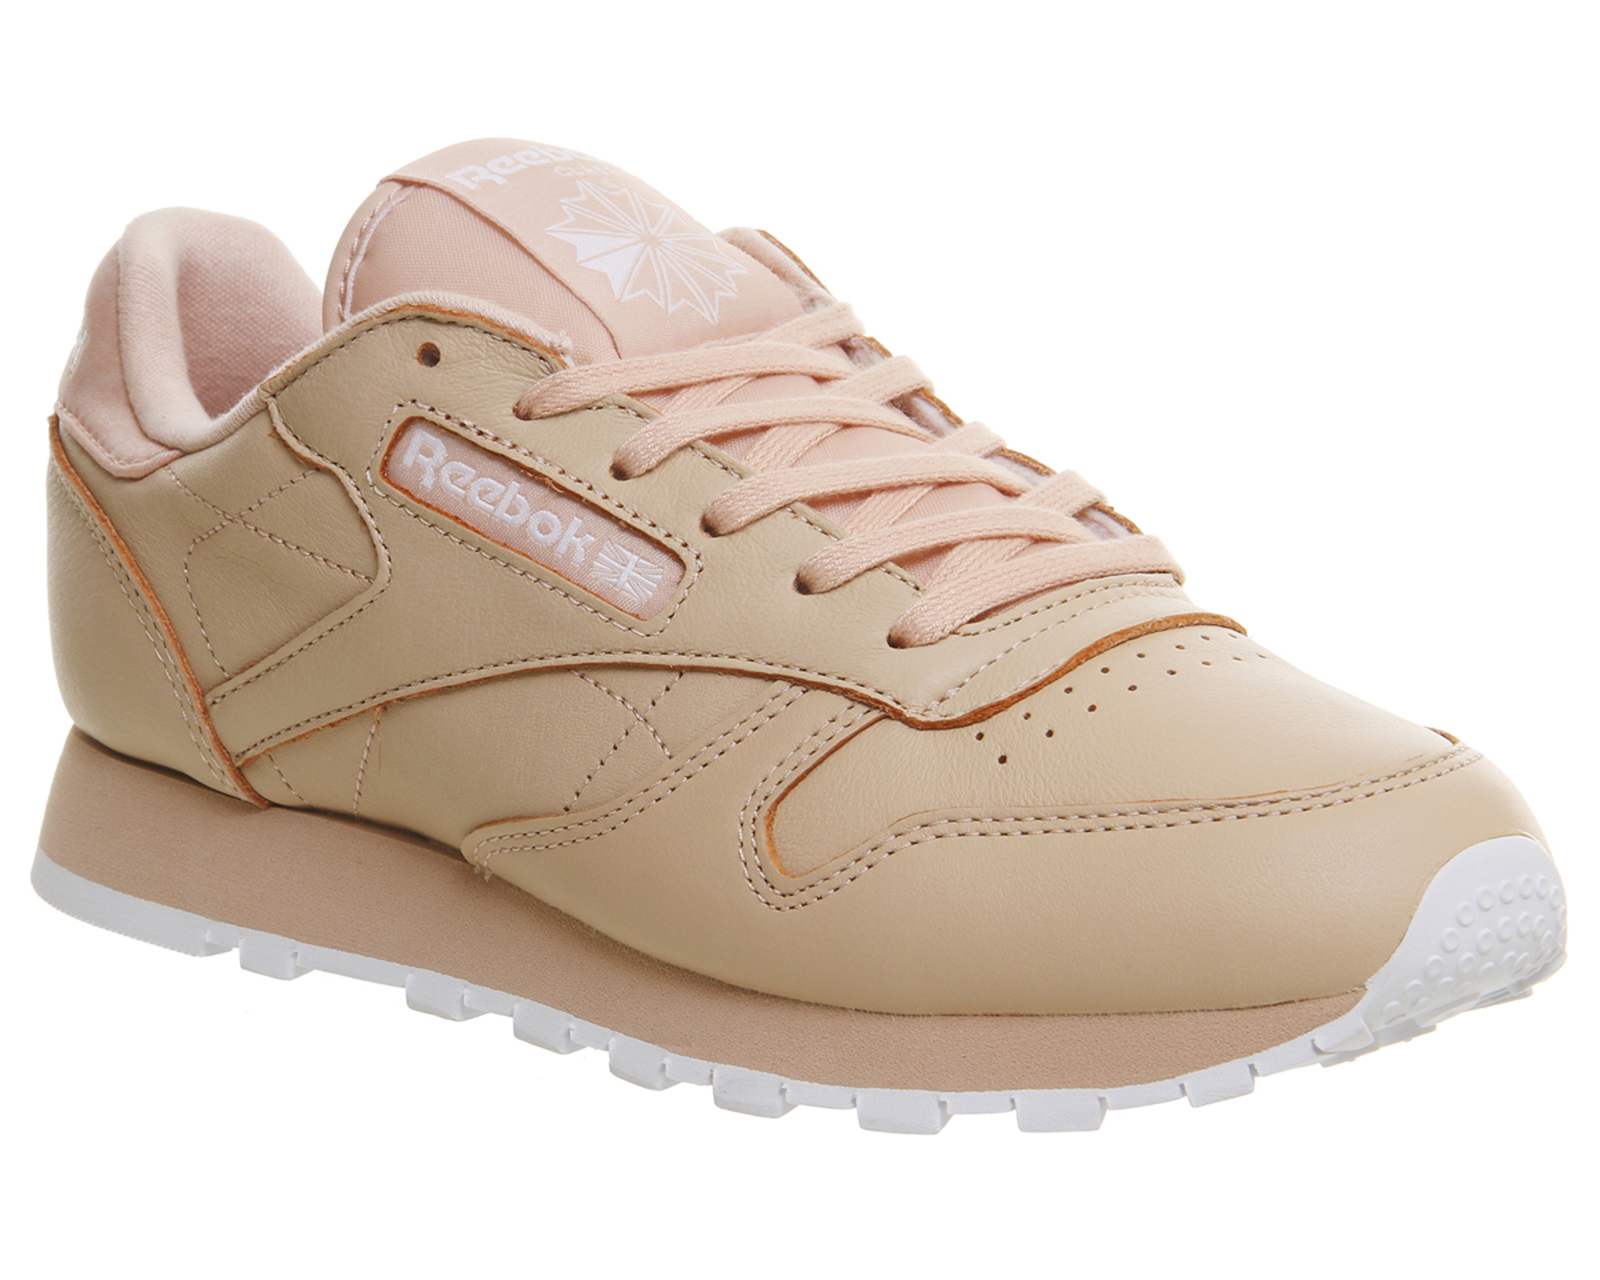 reebok classic leather trainers in white